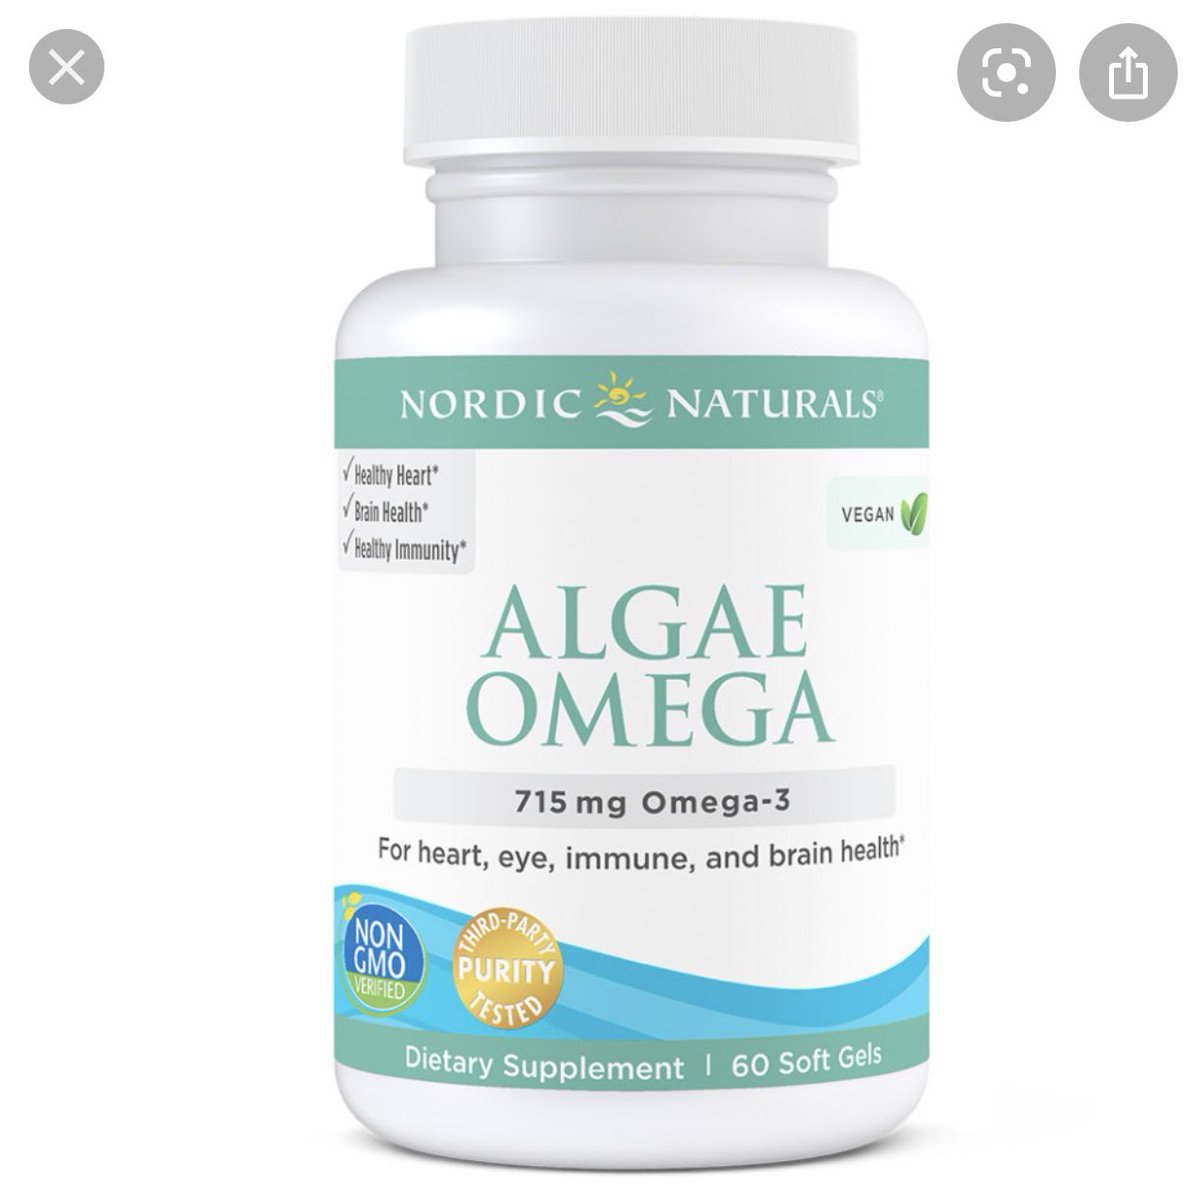 just ran out of this but algae oil for omega3!